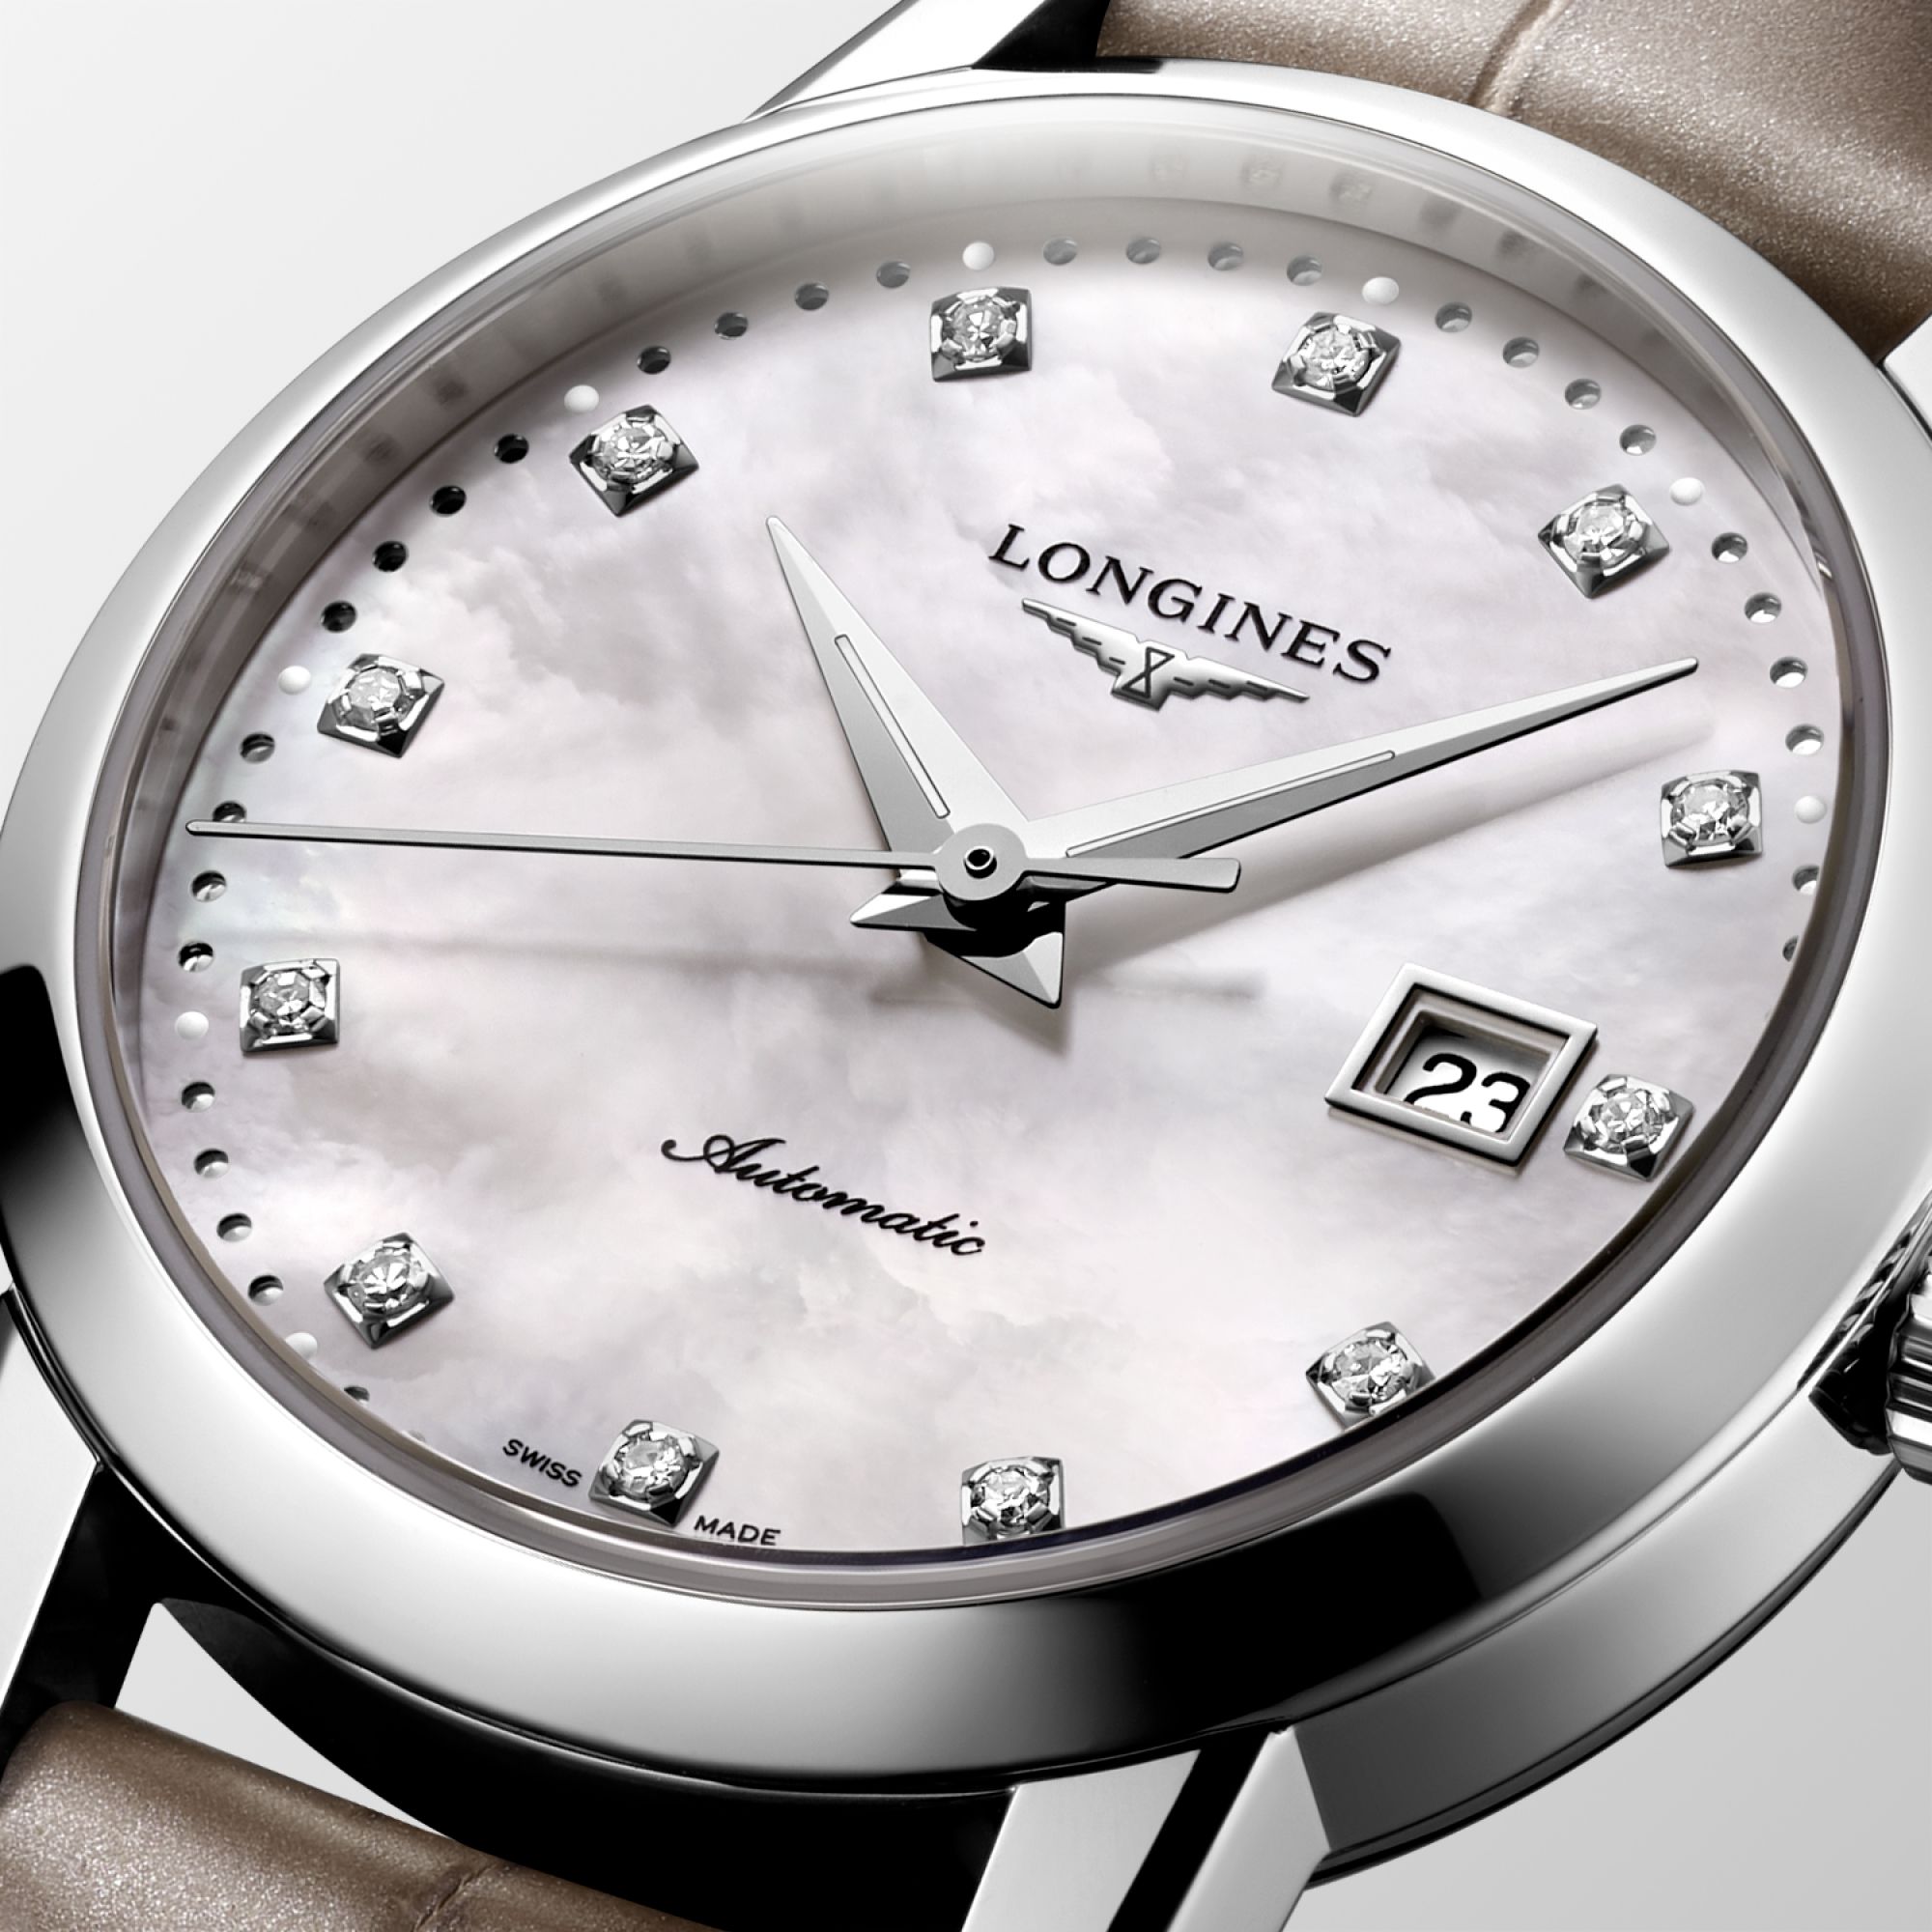 The Longines 1832 Watchmaking Tradition Référence :  L4.325.4.87.2 -2